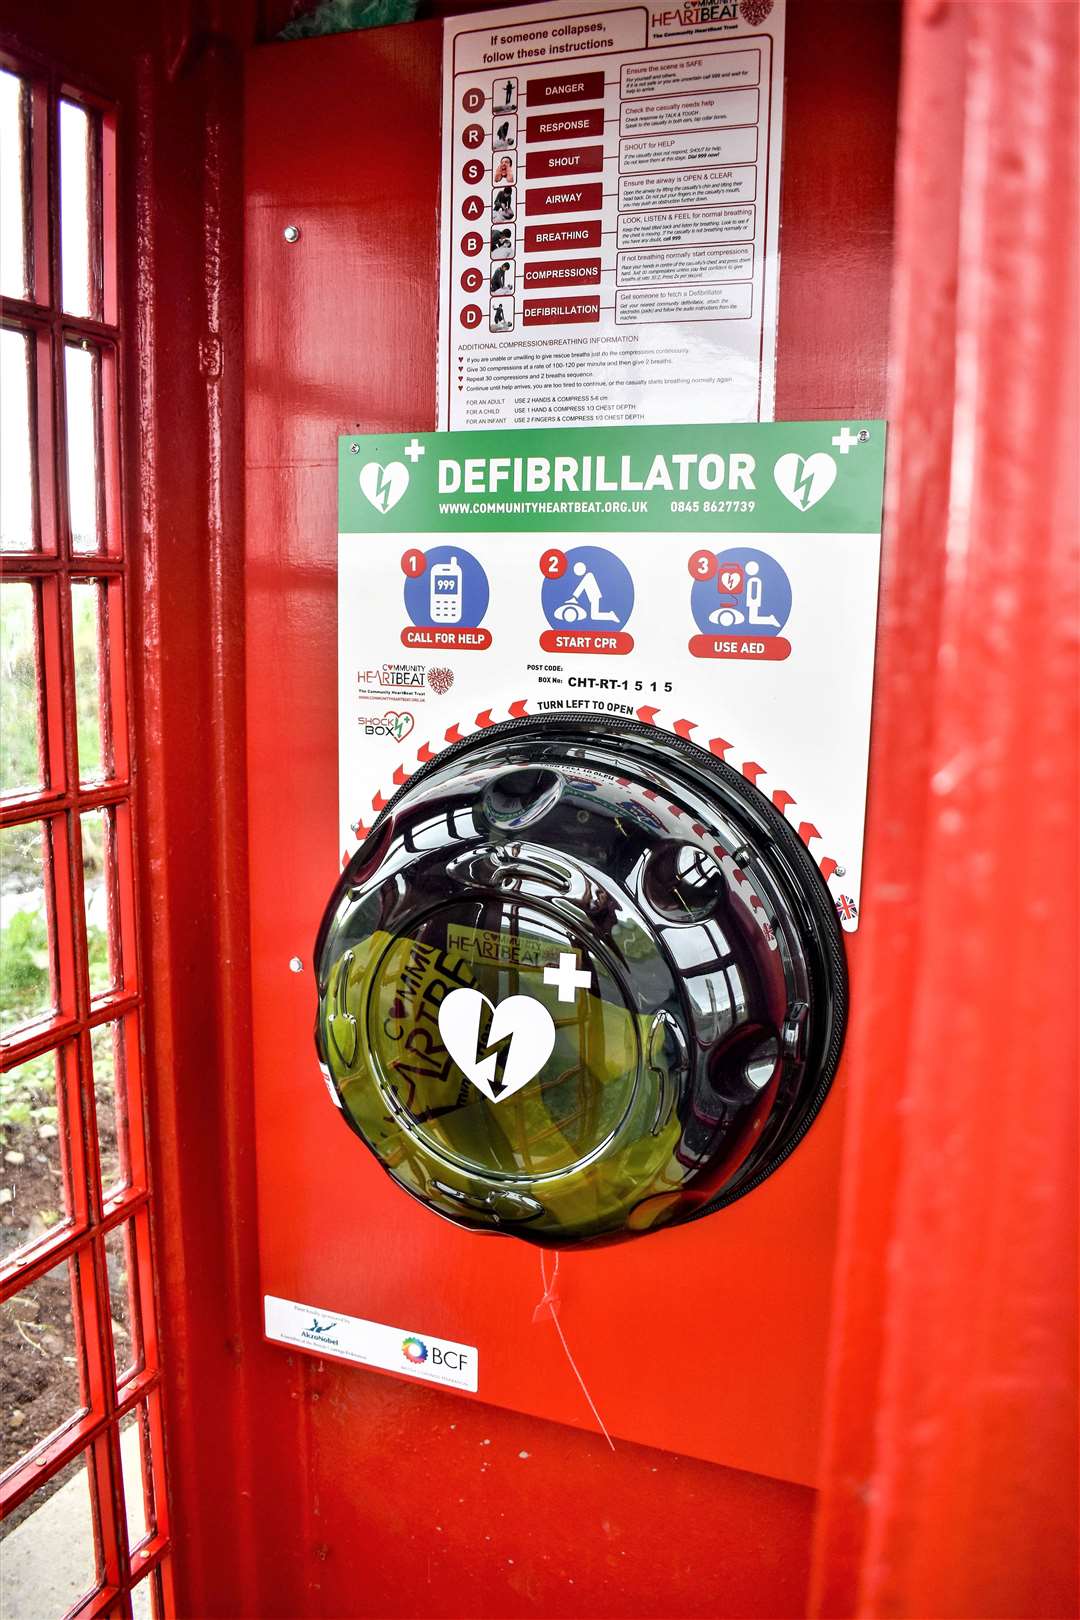 This phone box has been altered to home a defibrillator.